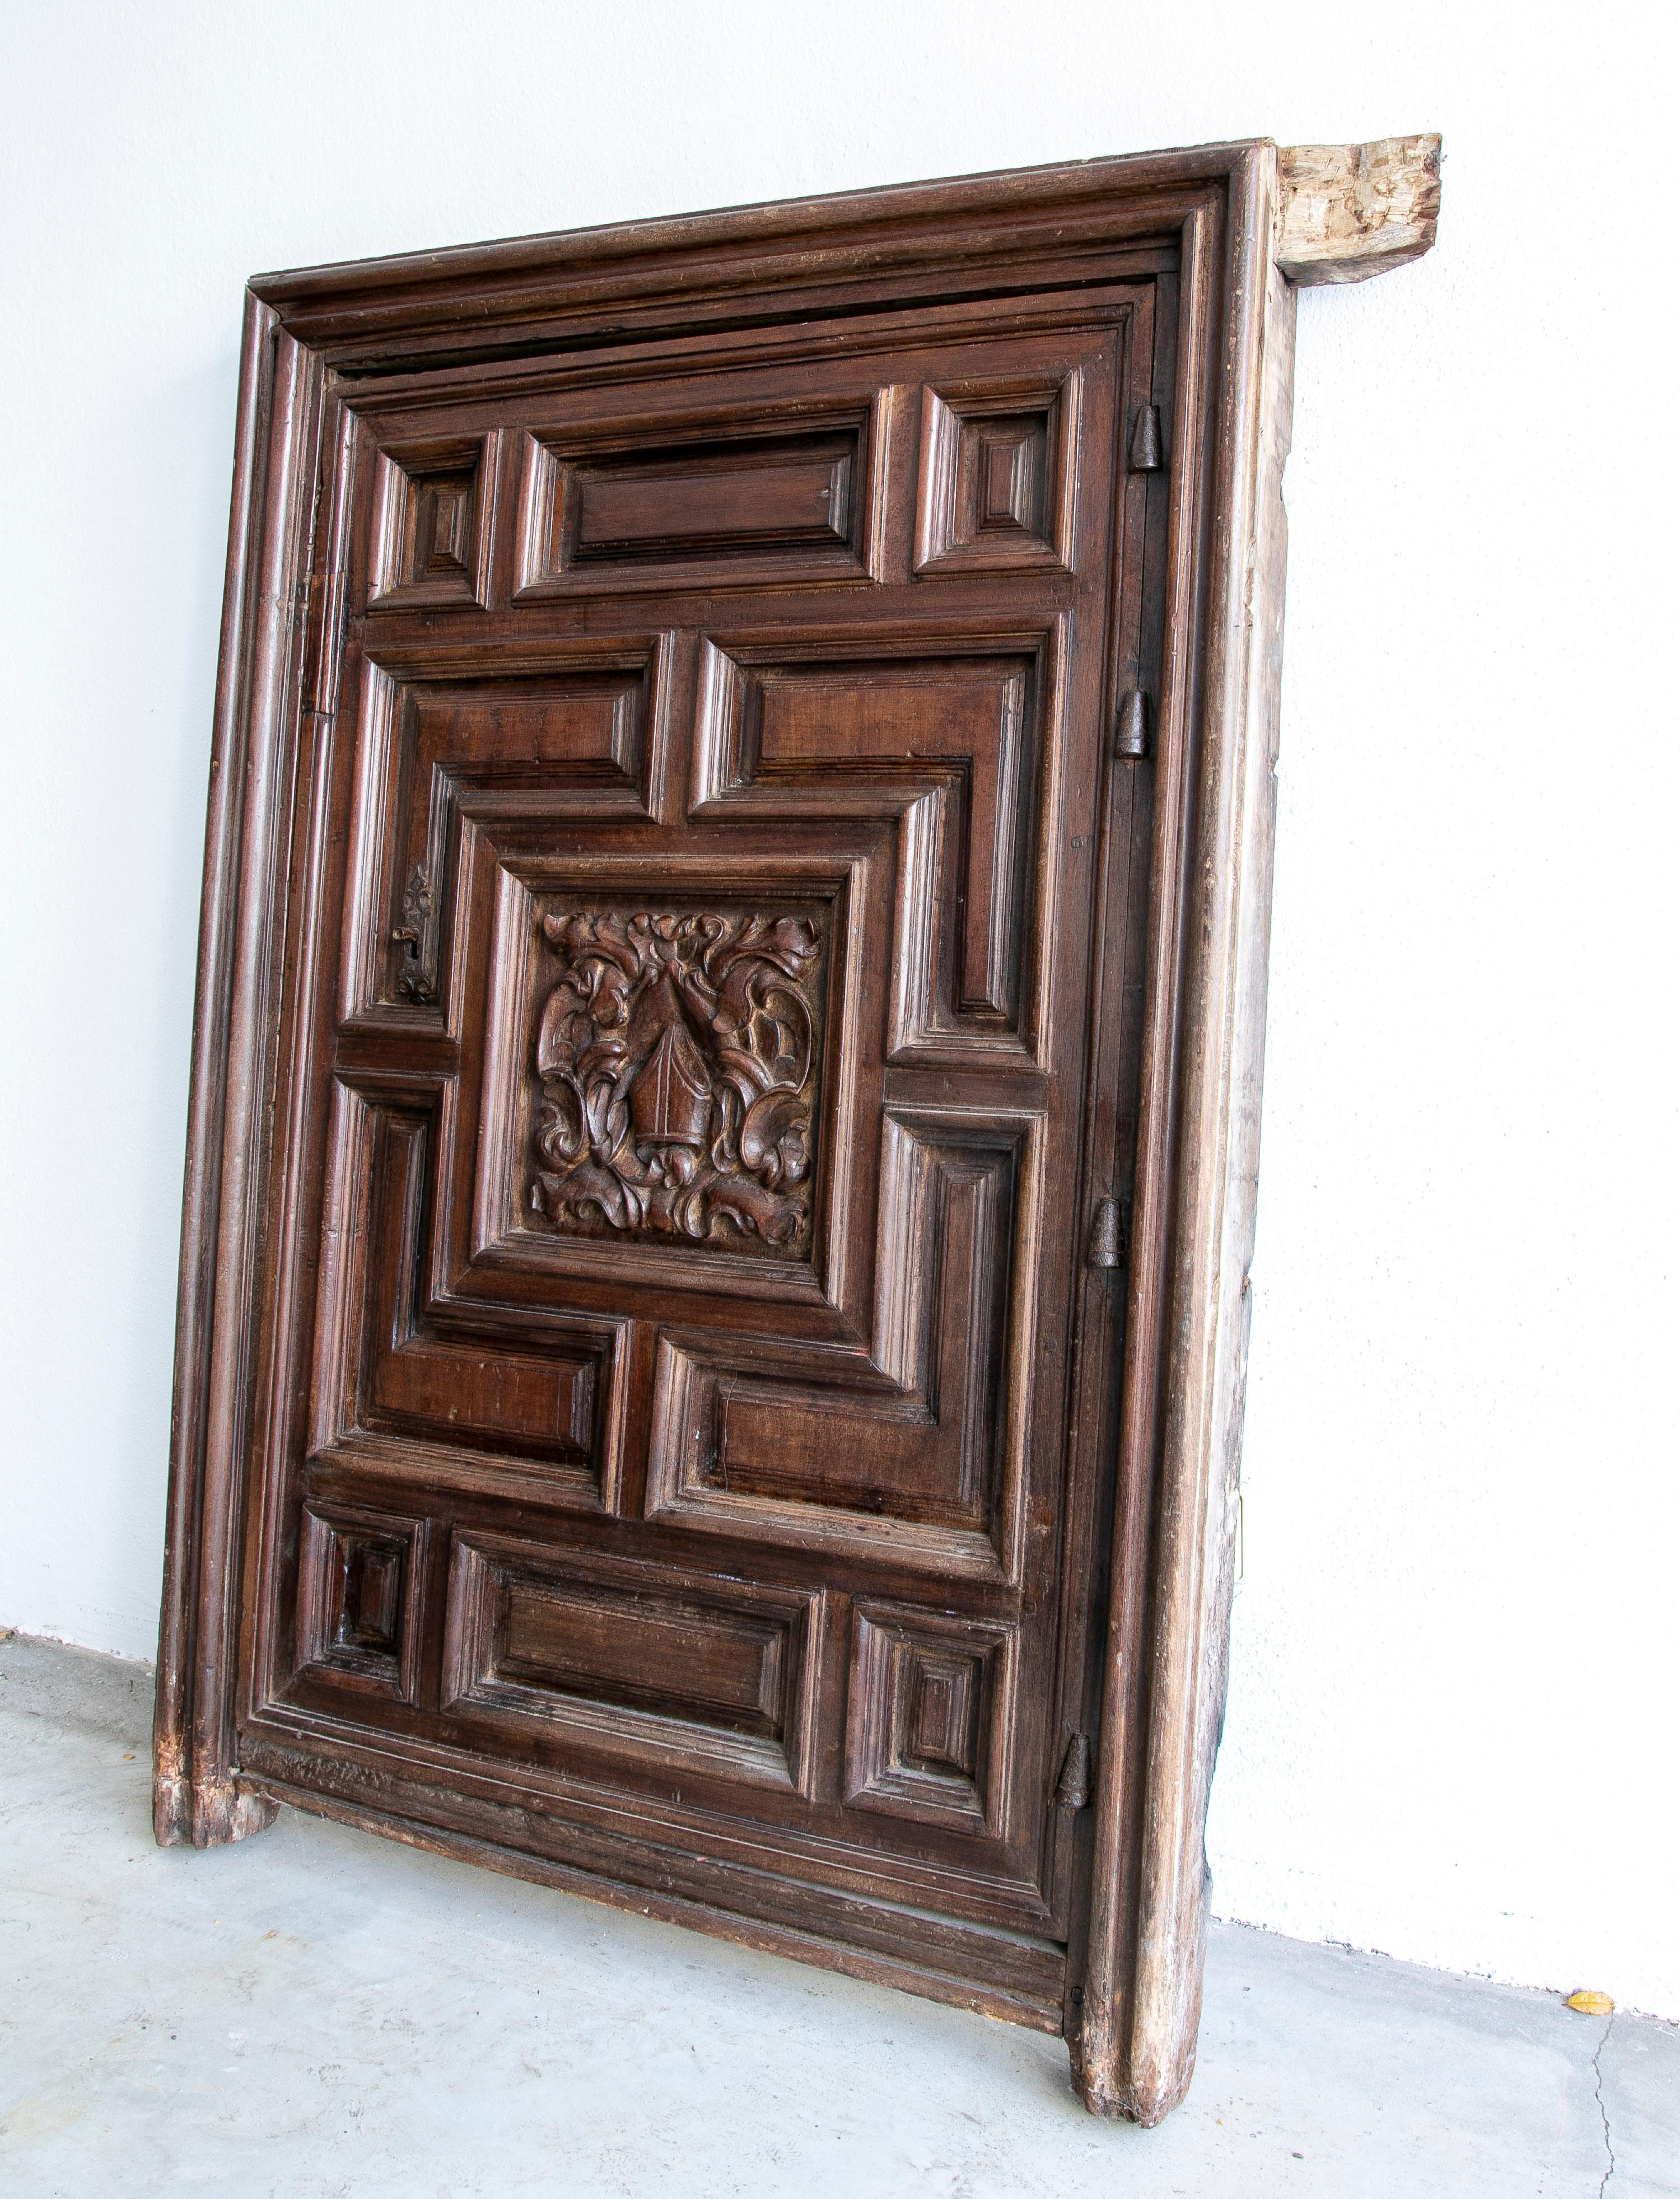 Antique 18th century Spanish hand carved walnut wide panel door with a central crest representing a mitre hat surrounded by acanthus leaf scrolls. The mitre is the traditional, ceremonial headdress of bishops and certain abbots in traditional